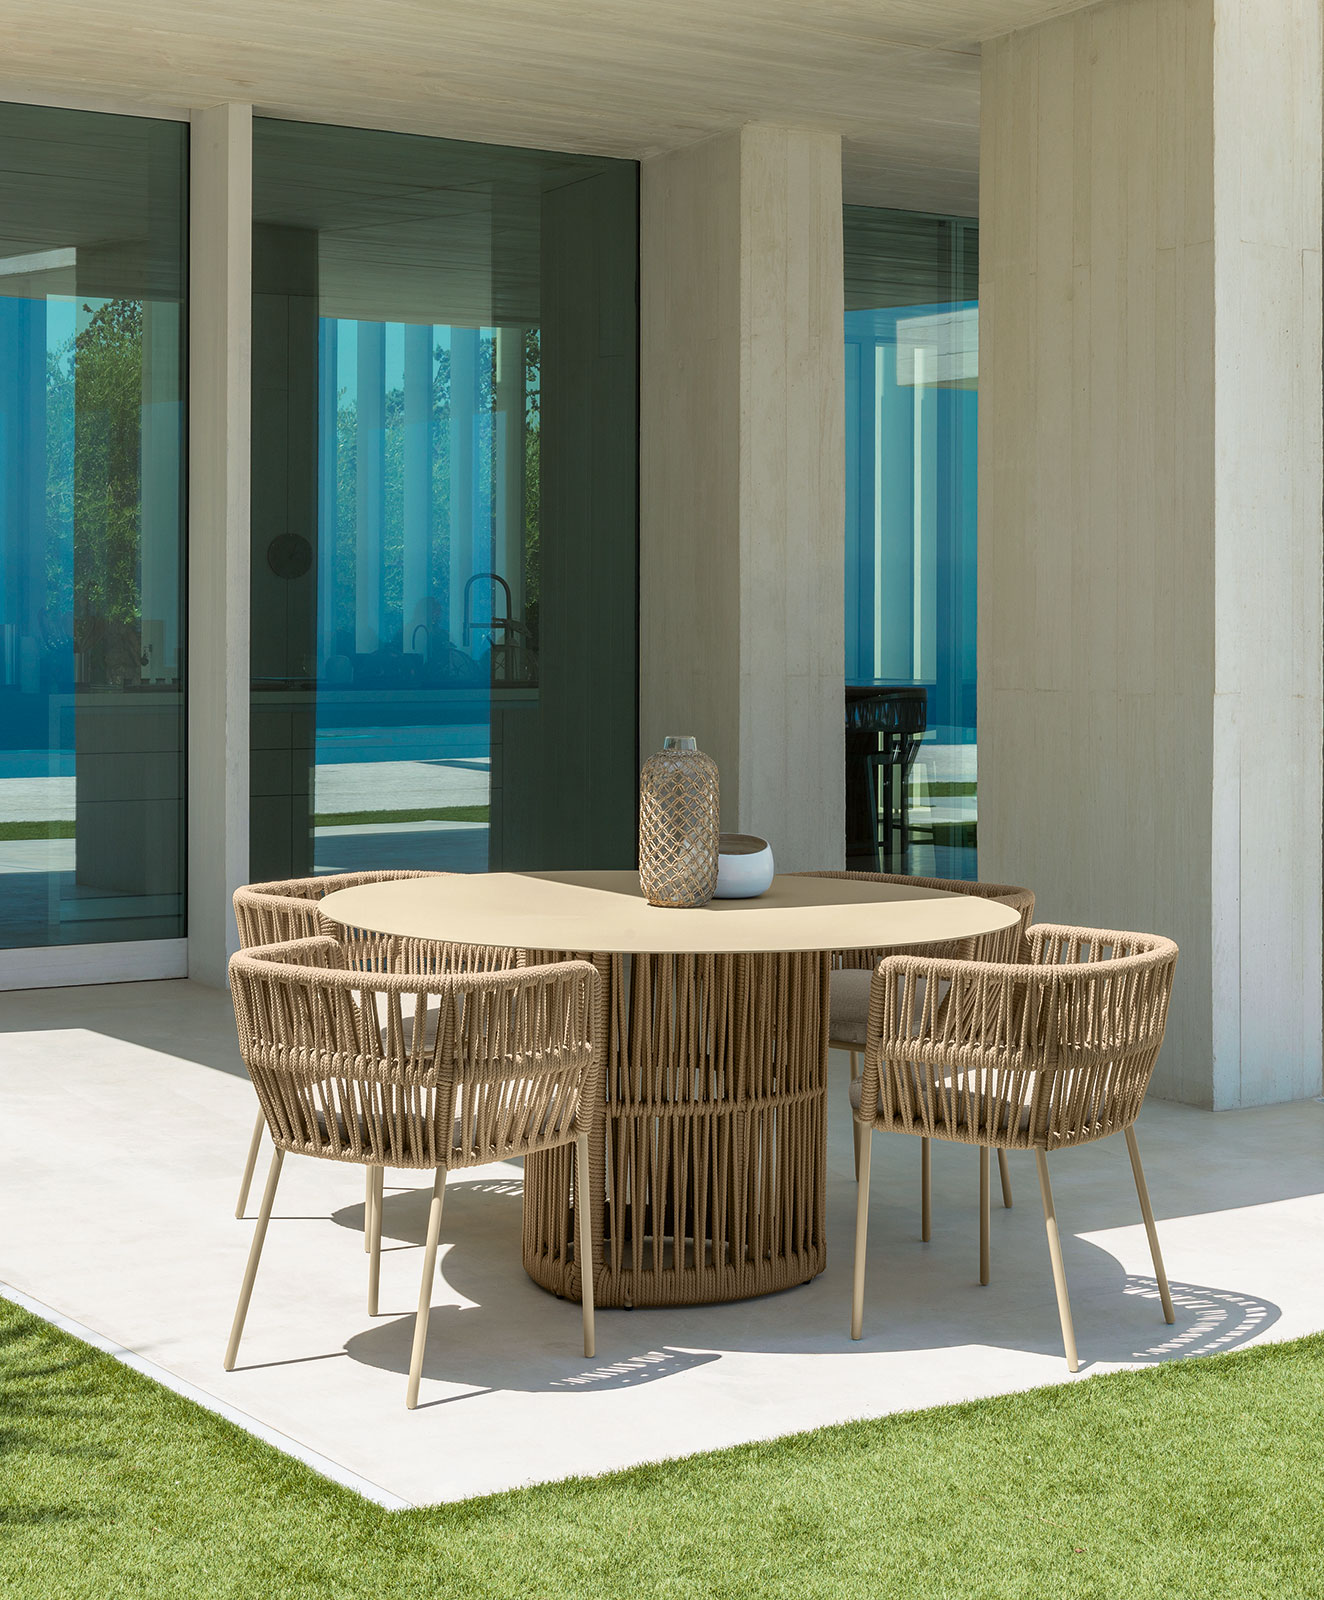 This wonderful armchair is part of the Reef outdoor collection designed by Ludovica and Roberto Palombo together with tables, sofas, sunbeds and still more.